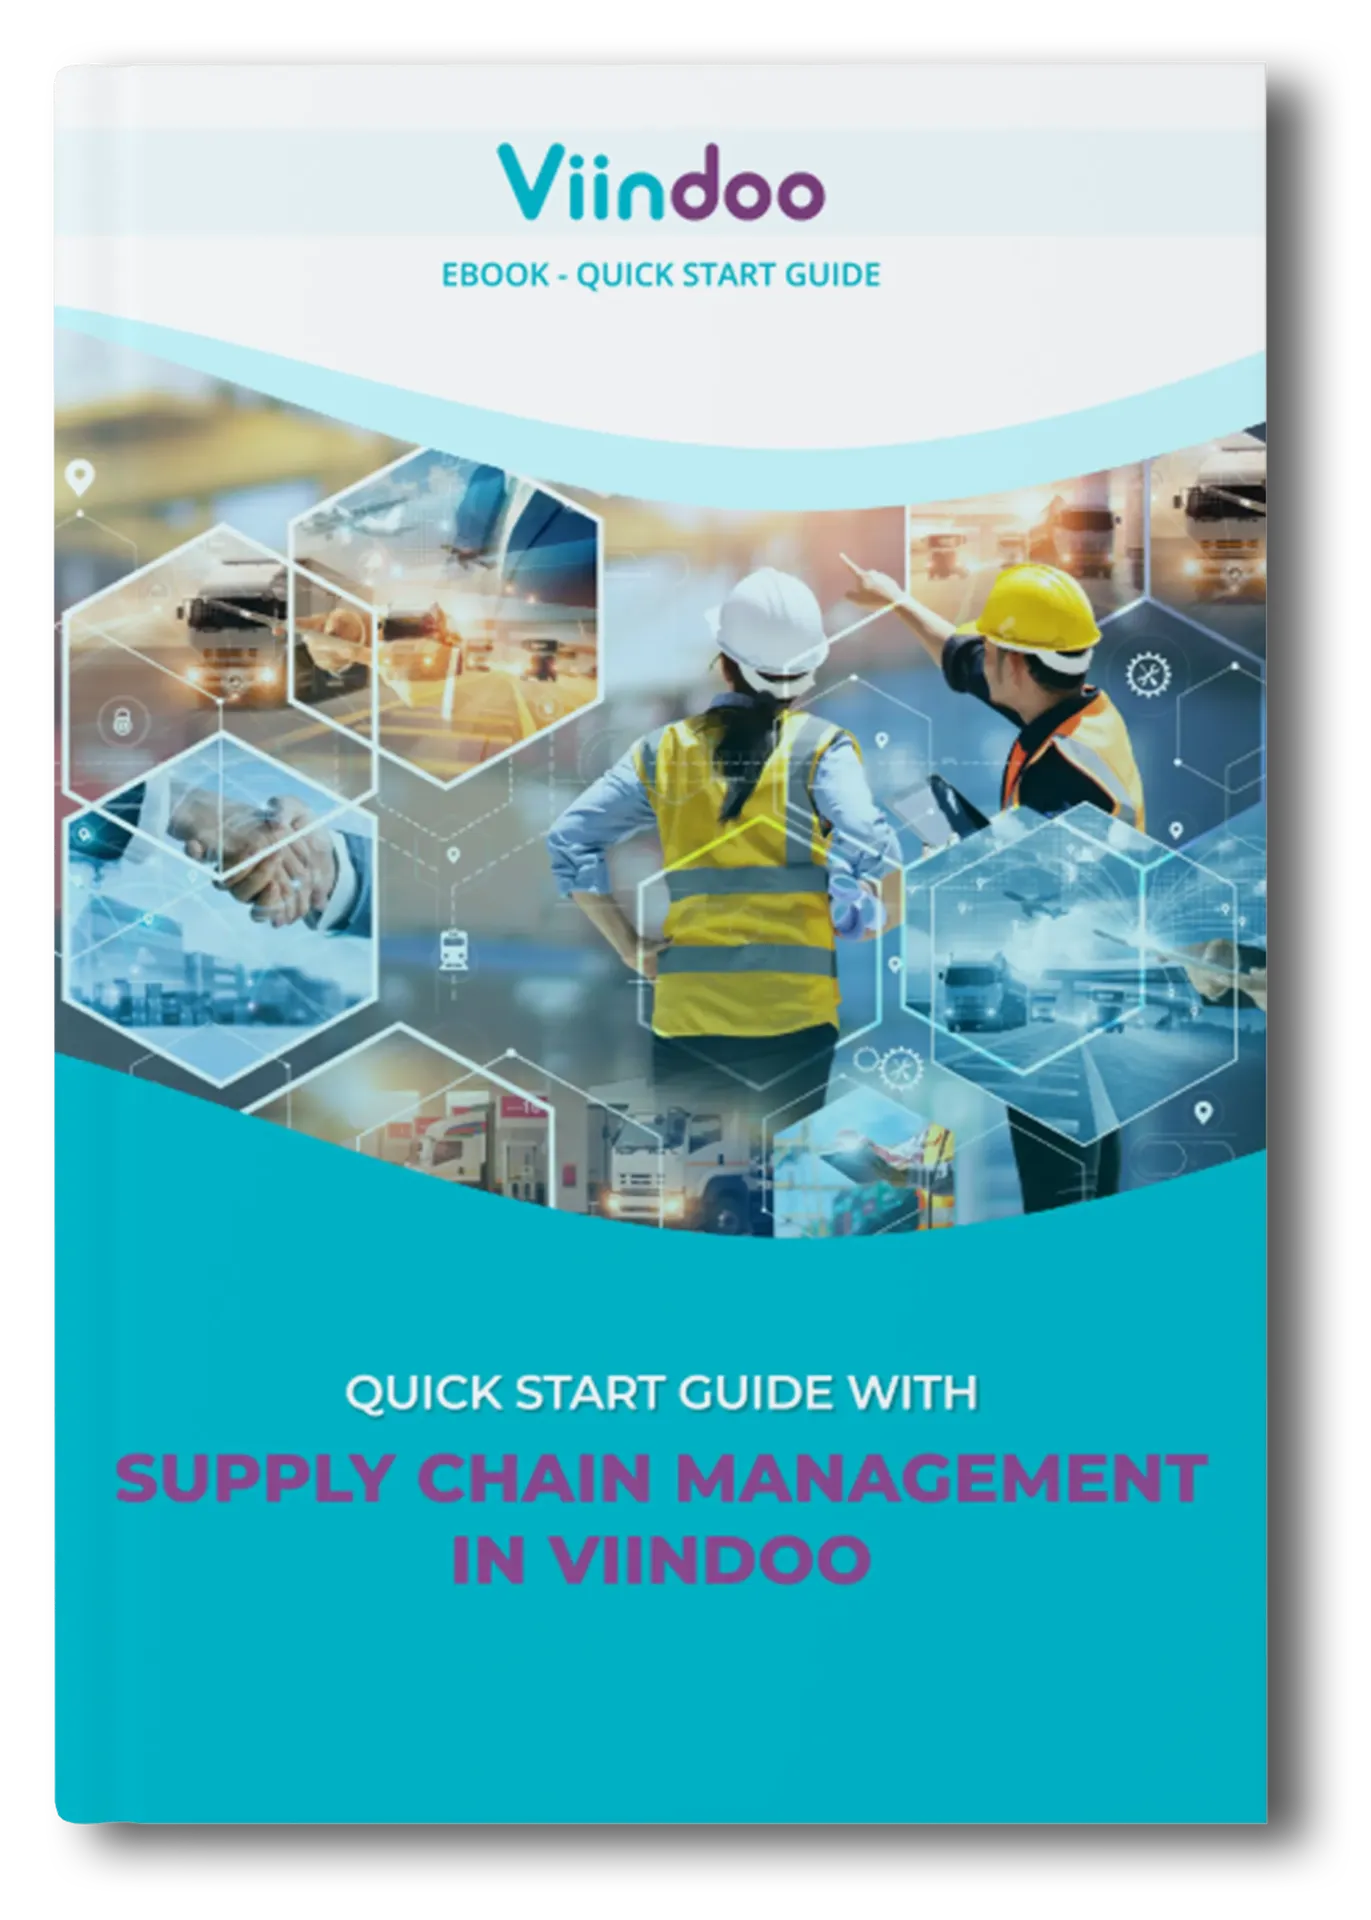 Quick Start Guide with Supply Chain Management in Viindoo